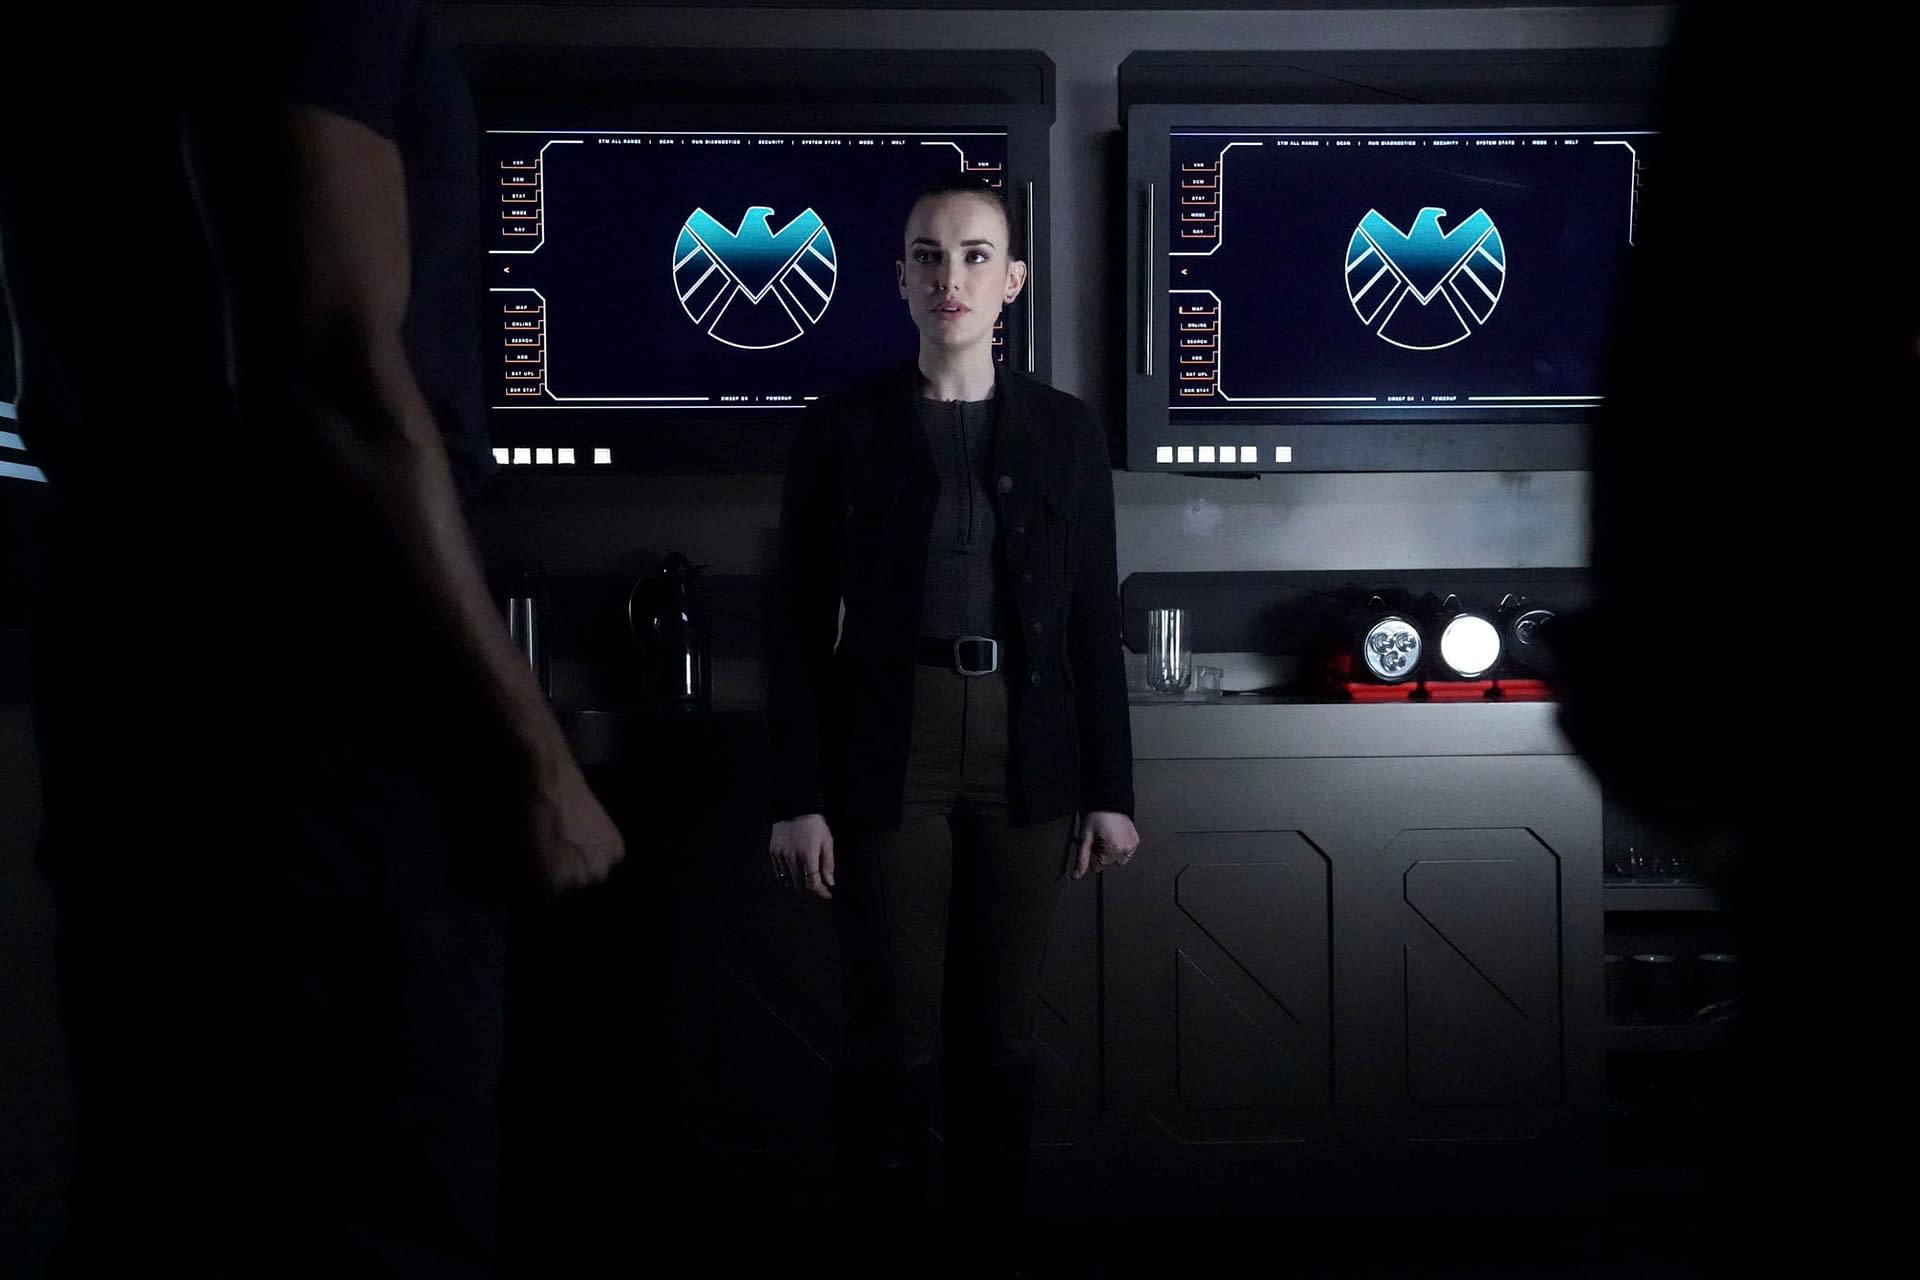 MARVEL'S AGENTS OF S.H.I.E.L.D. on ABC